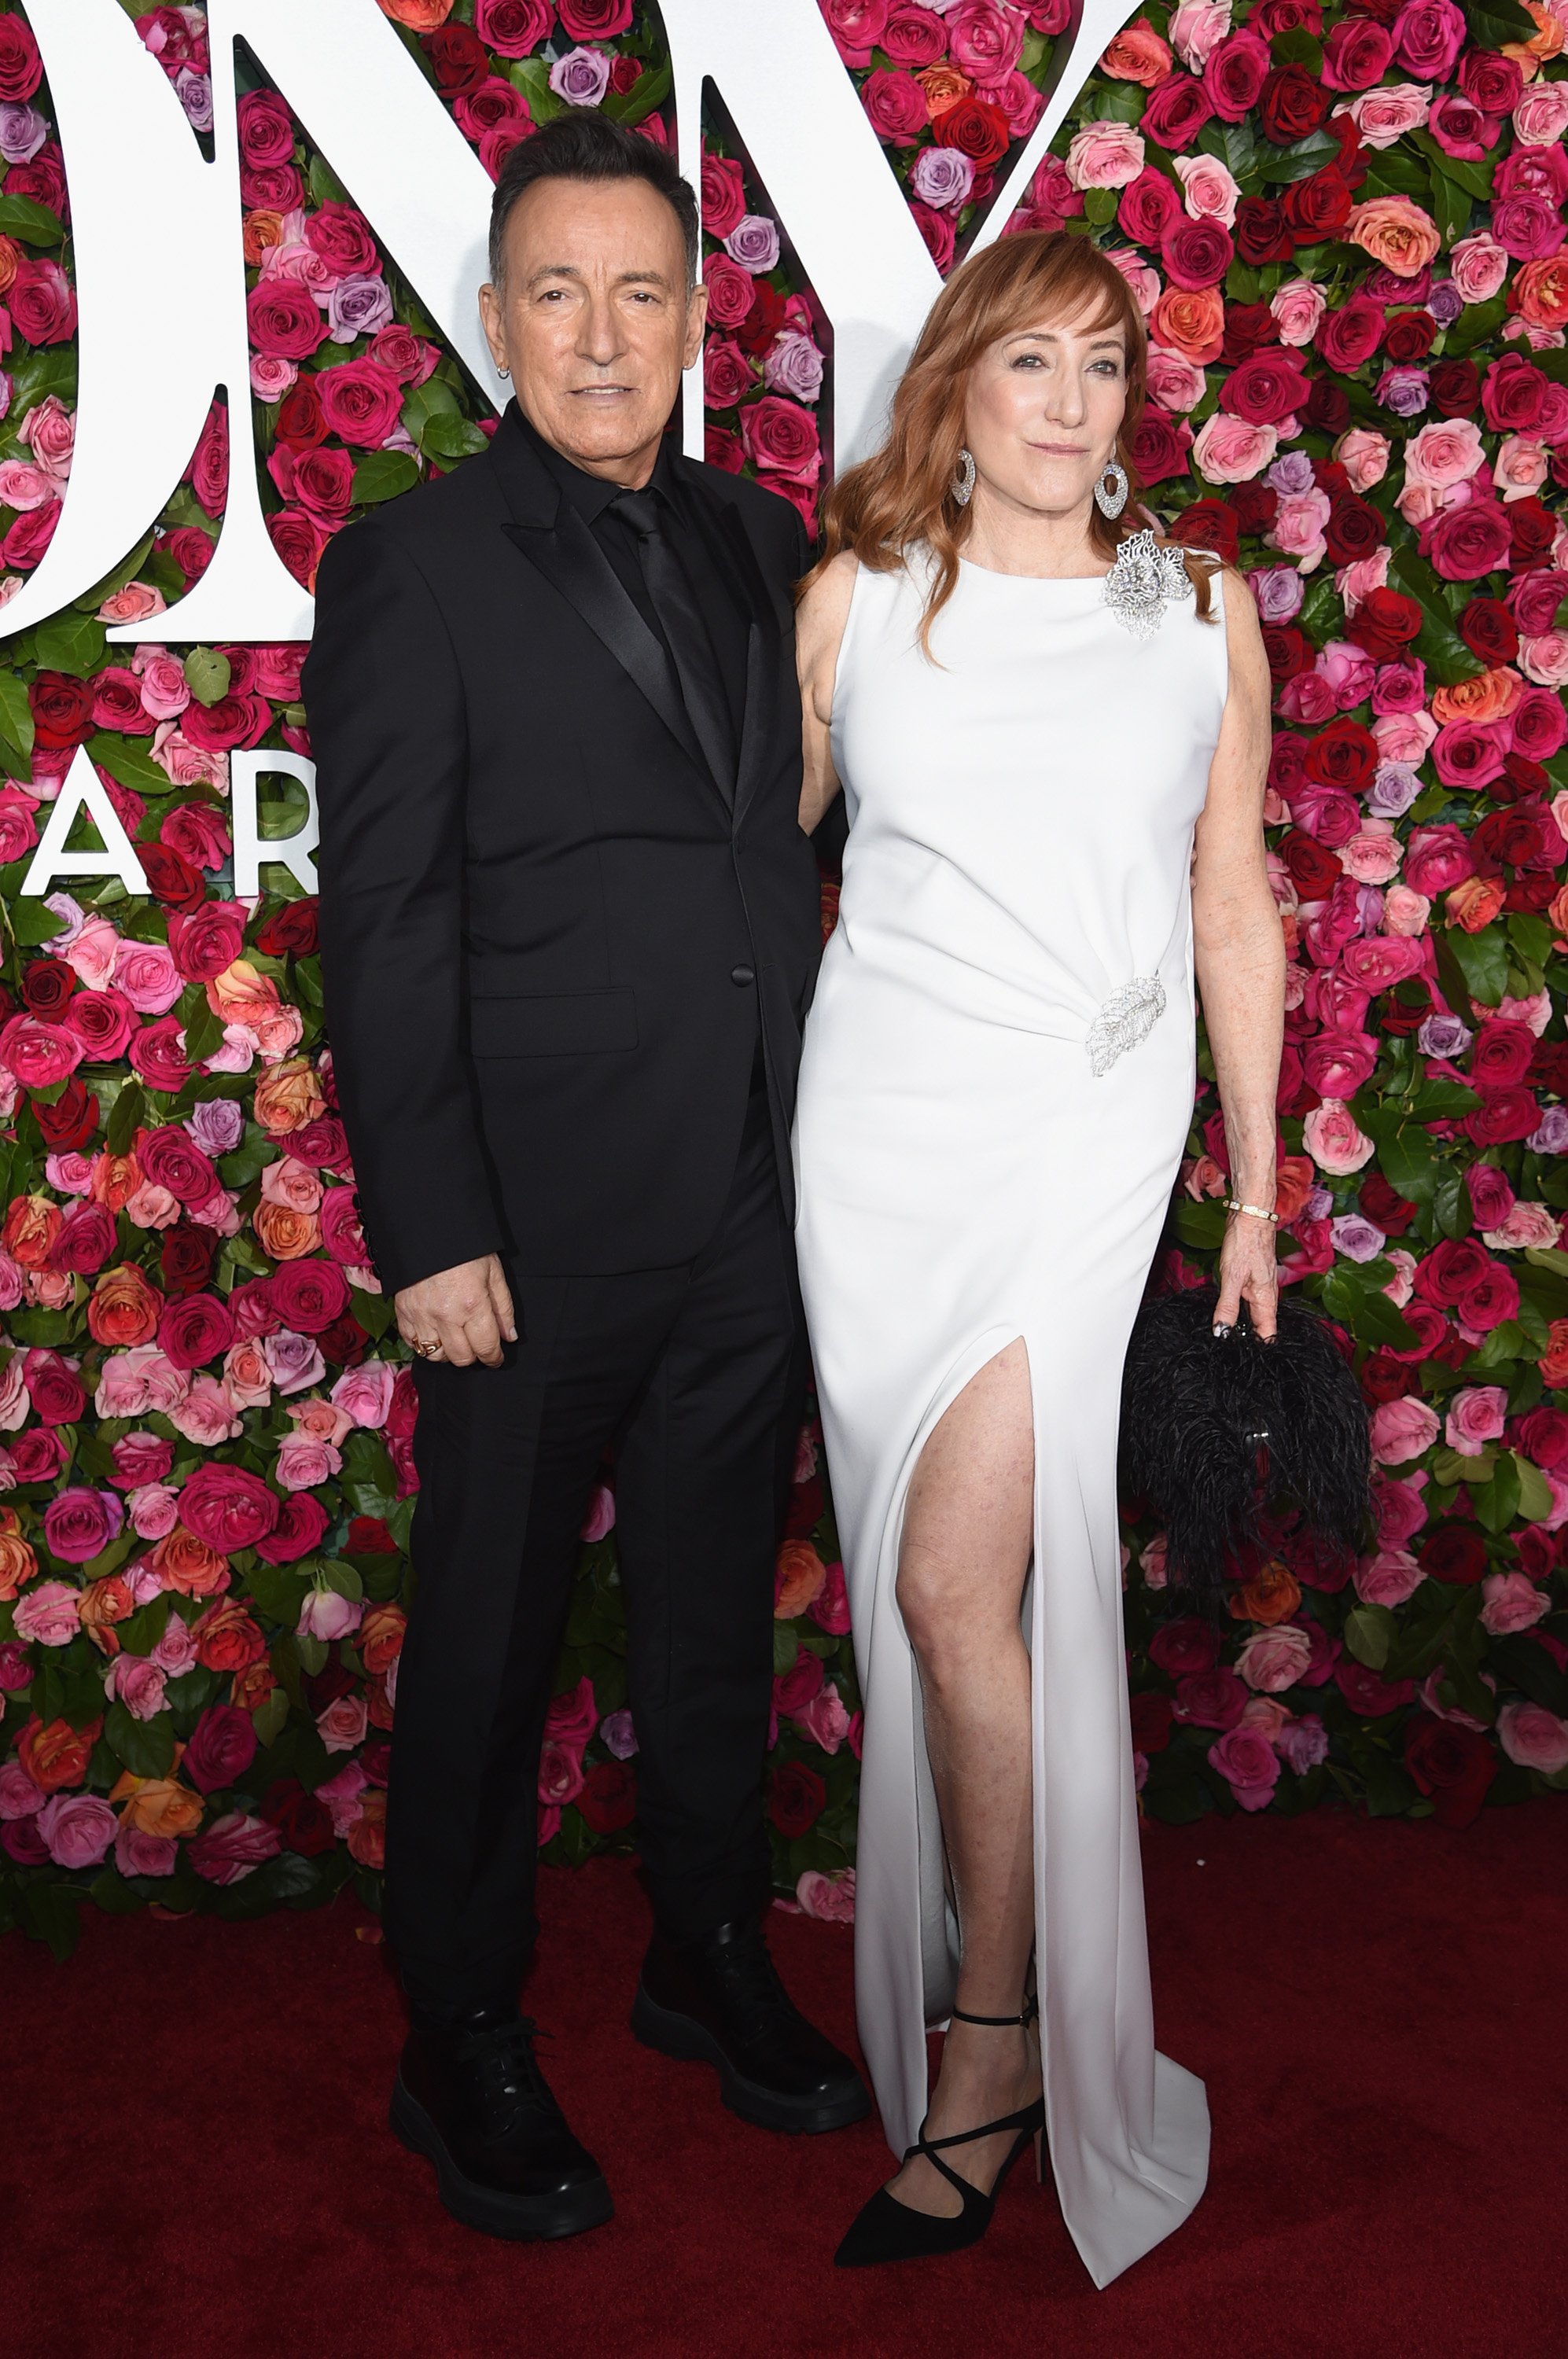 Bruce Springsteen and his wife Patti Scialfa at the 72nd Annual Tony Awards at Radio City Music Hall on June 10, 2018 in New York City.  |  Source: Getty Images